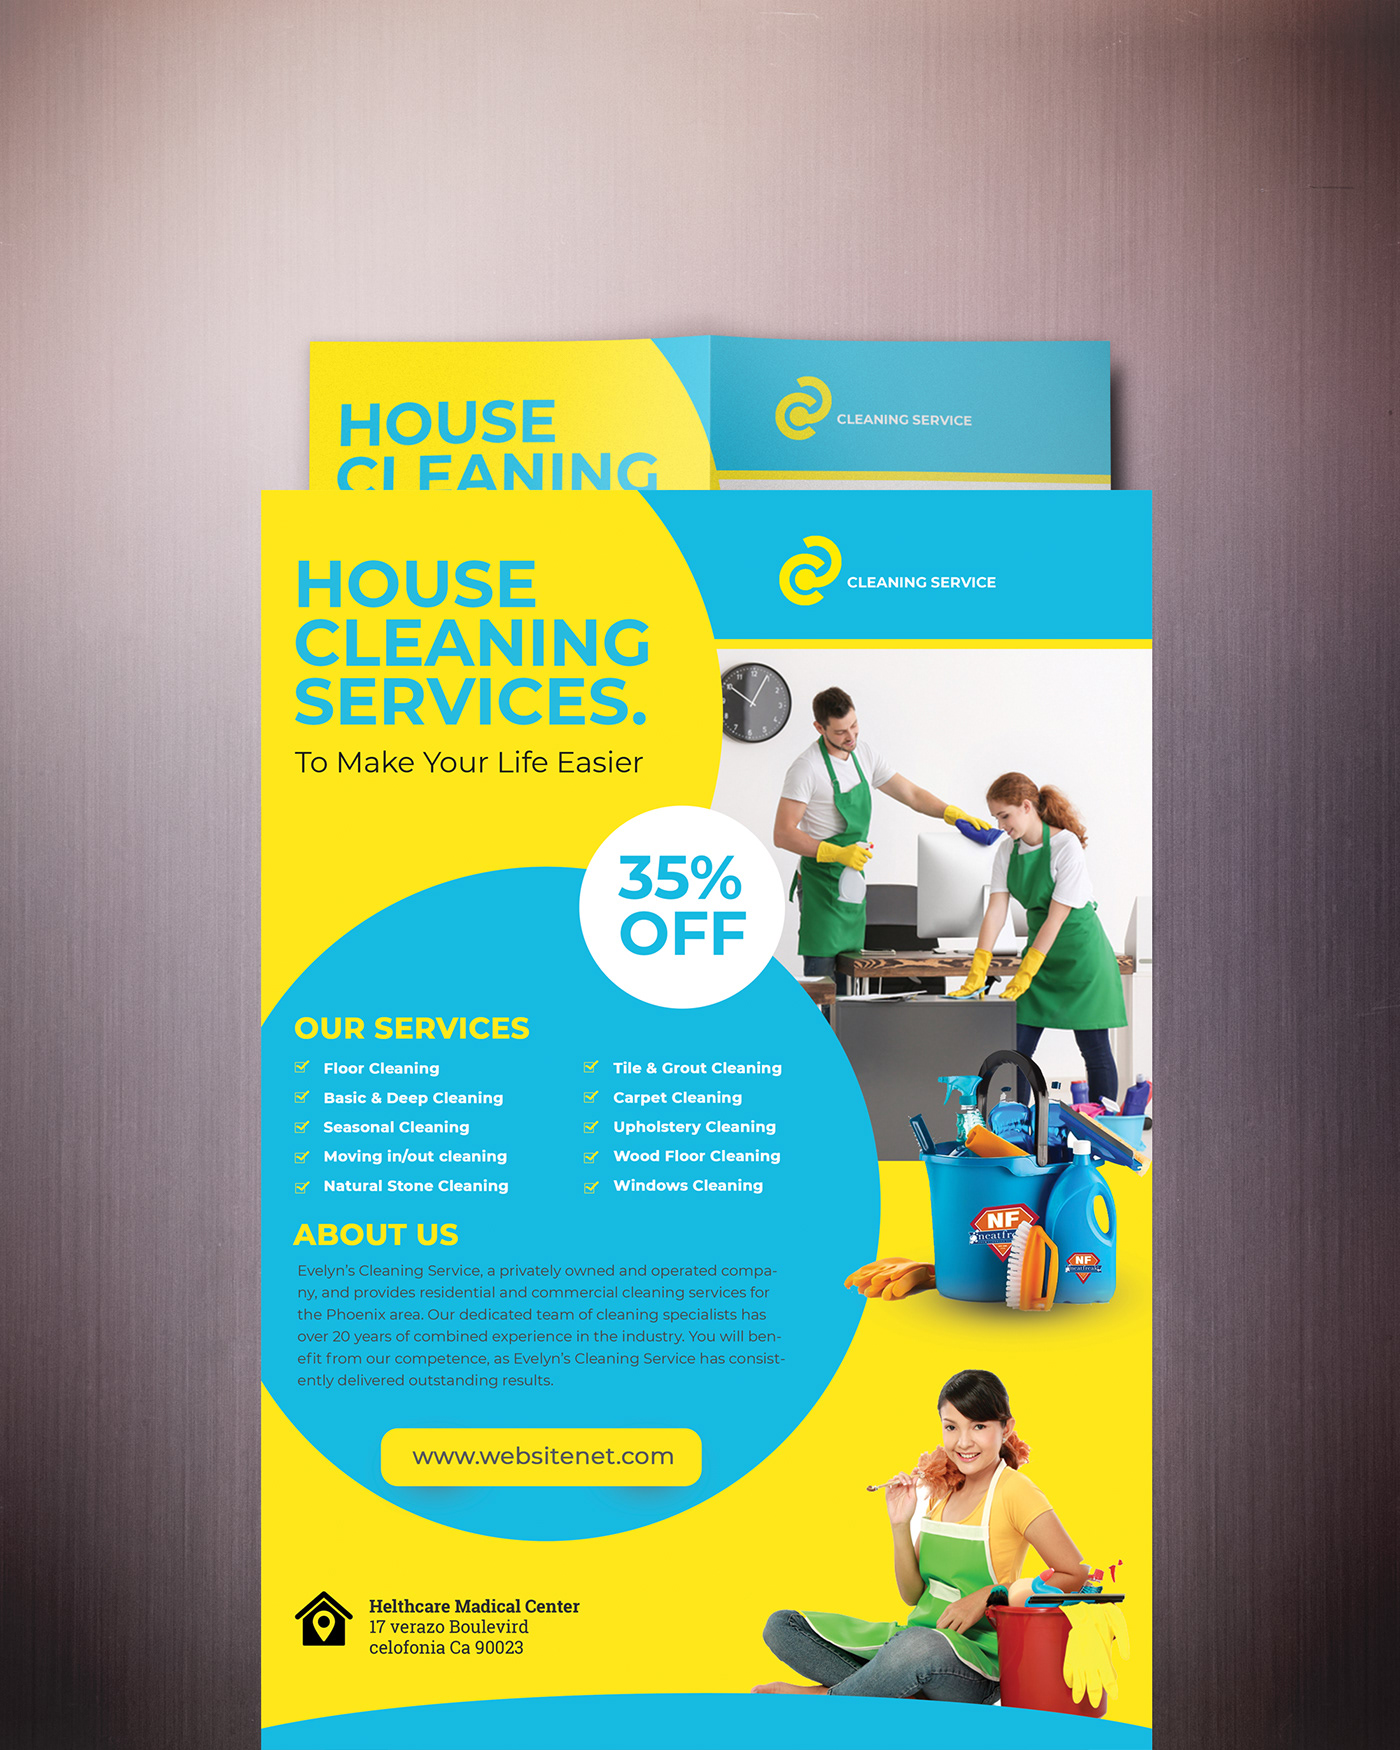 aam360 clean house Clean service cleaner cleaning agency cleaning business Cleaning Companies company